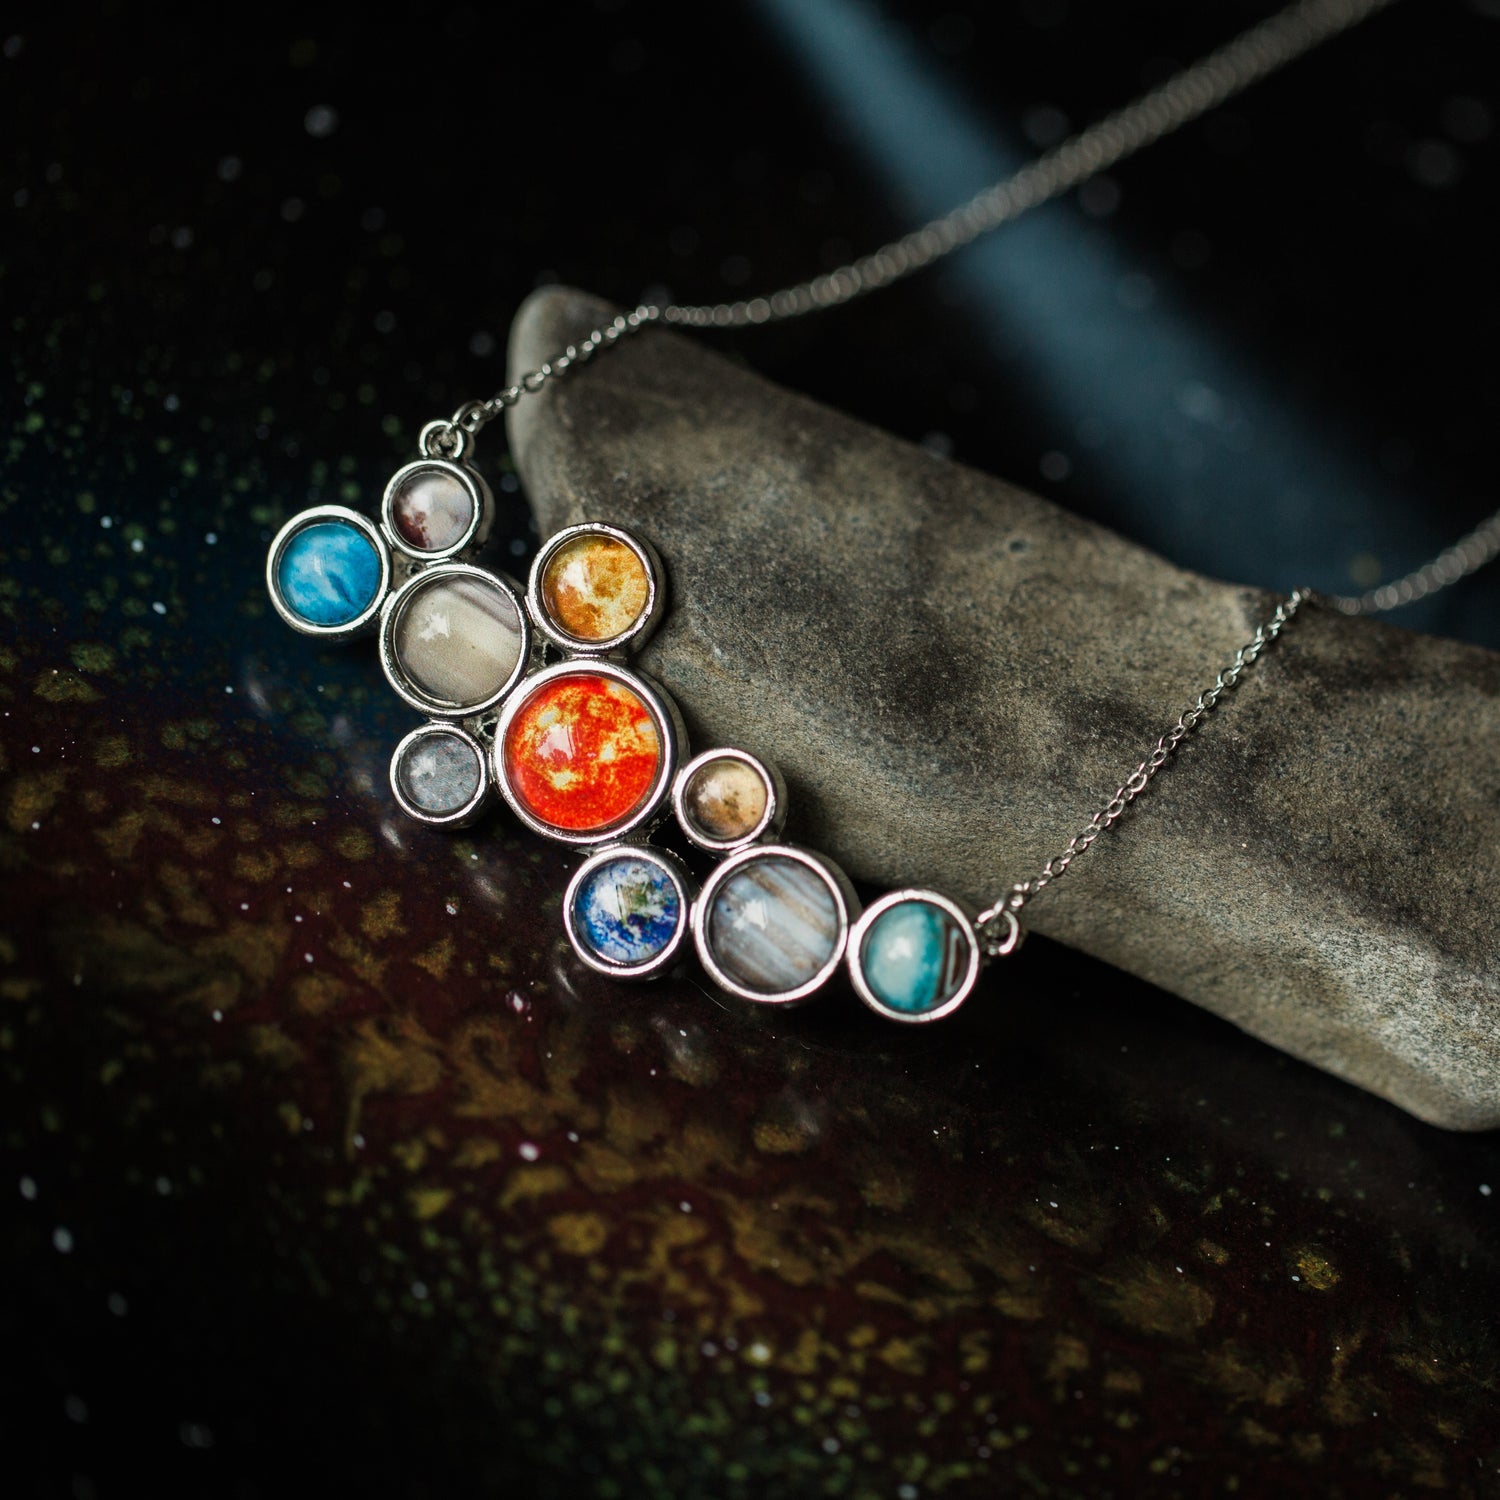 A pendant with the Sun and planets of our solar system in a bubble formation